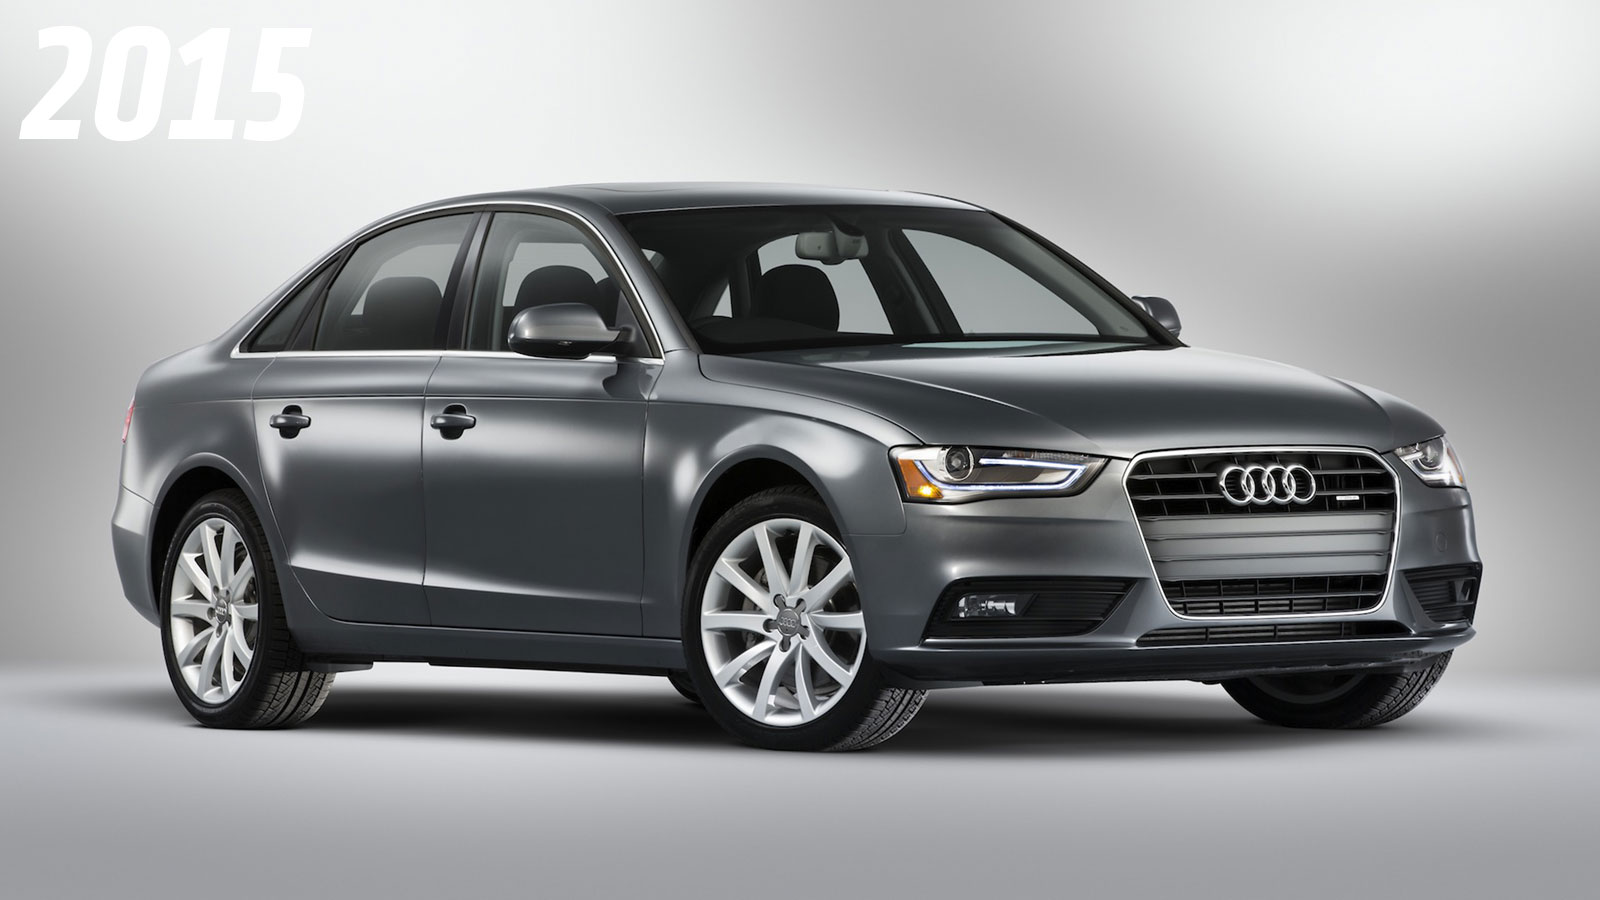 See How The 2016 Audi A4 Is Different From The Old A4 (Not Much)